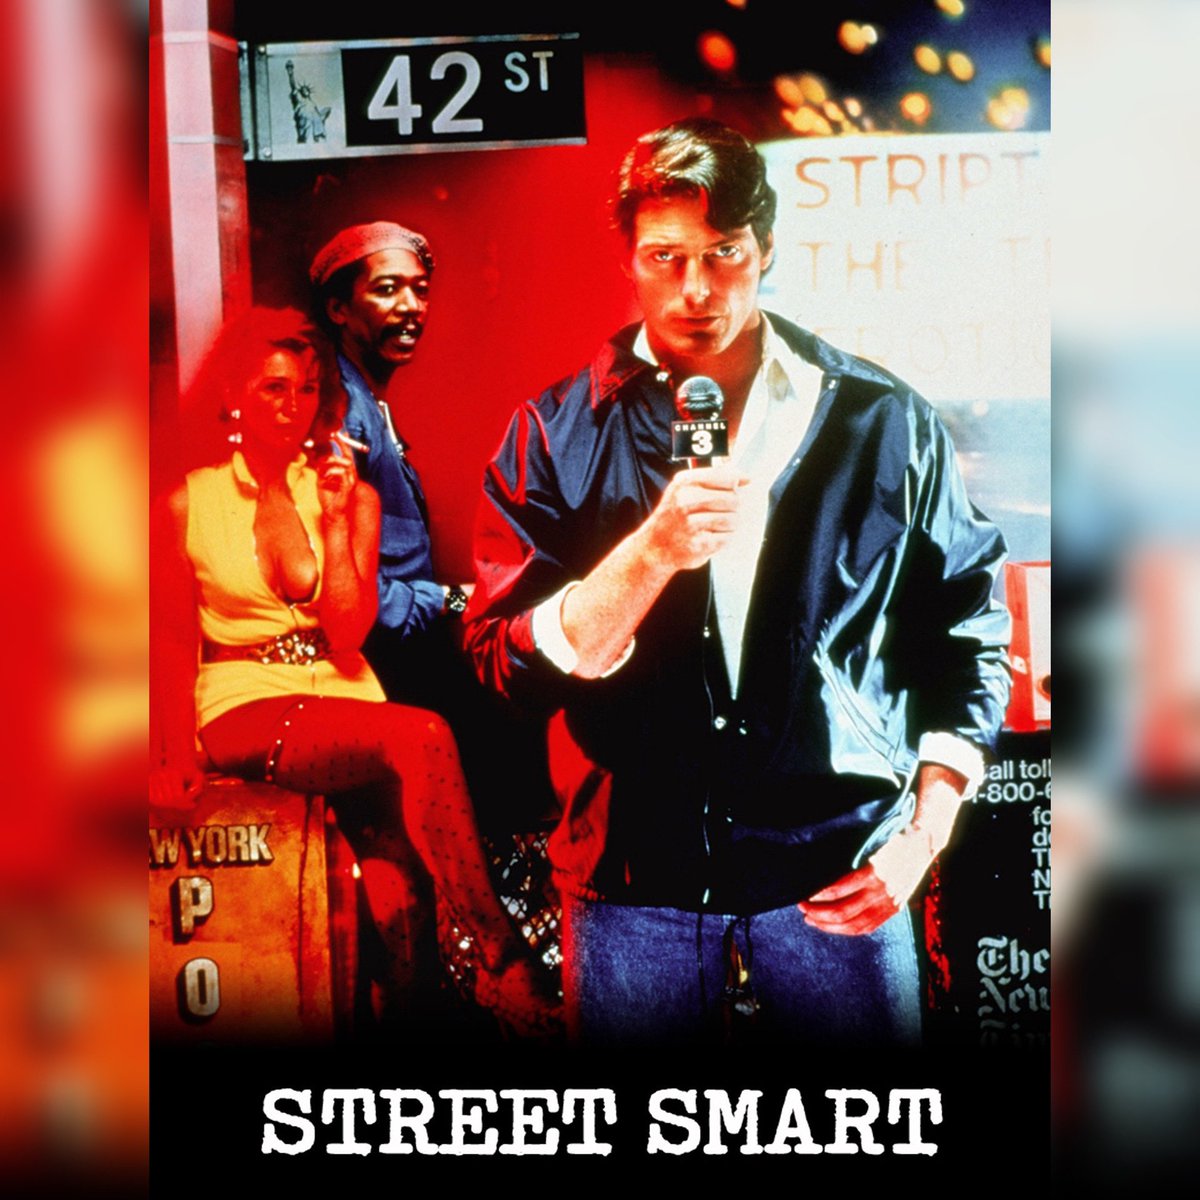 OUT NOW! 
The Cannon Bros get “STREET SMART”!

One of Cannon’s most critically acclaimed movies (for good reason)! 

Sip a Yoo-Hoo, get wild w/ the scissors & stay Street Smart, Cannon-heads!

#cannonfilms #streetsmart #christopherreeve #morganfreeman #kathybaker #thecannoncanon